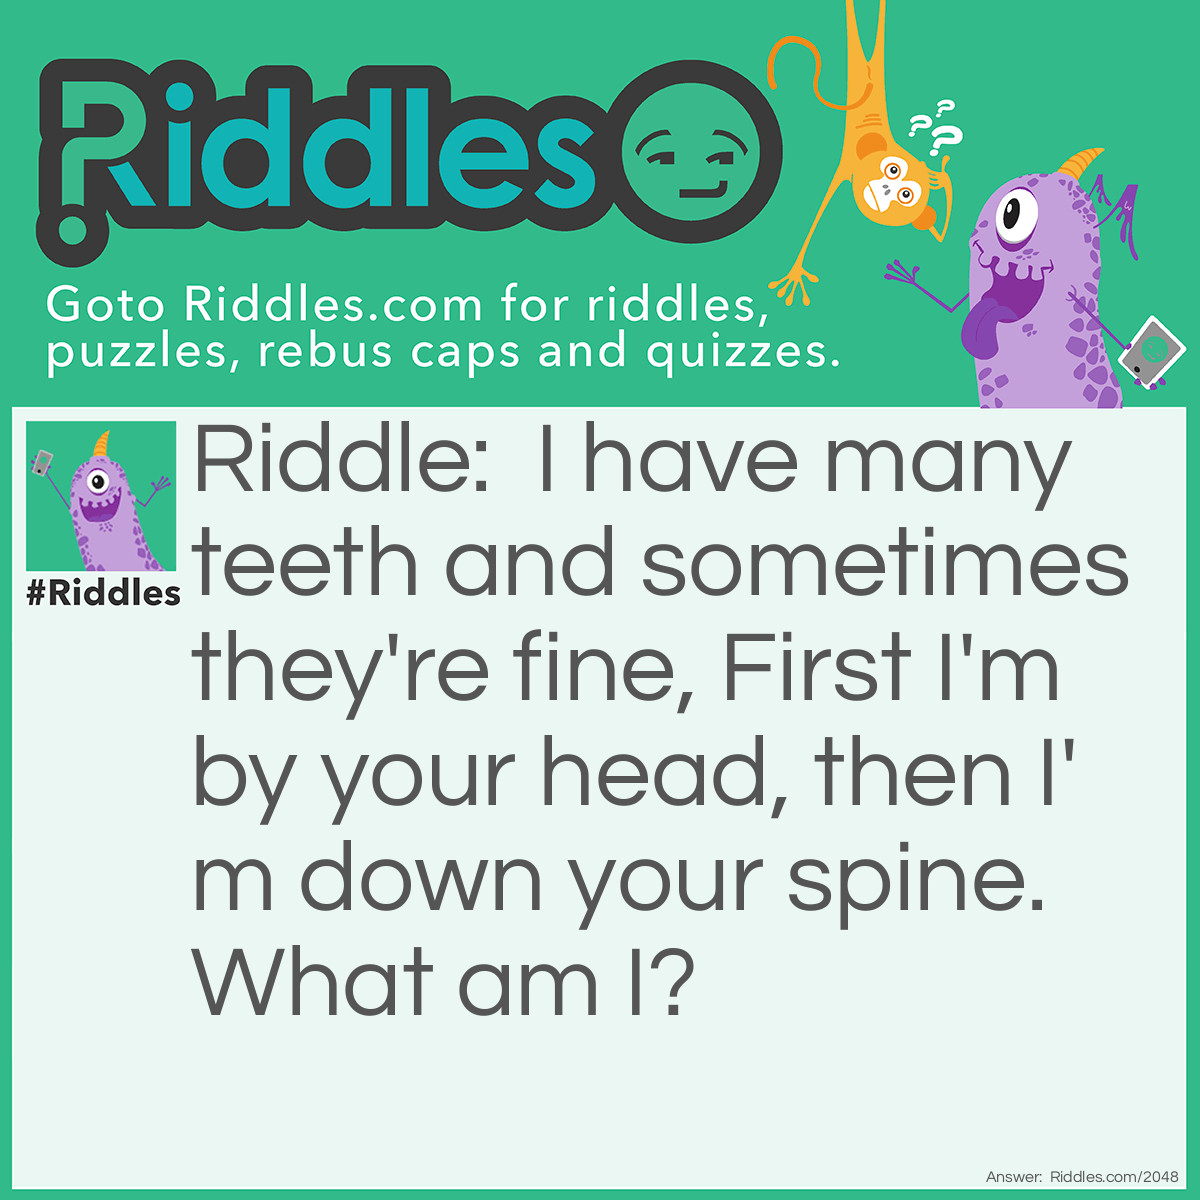 Riddle: I have many teeth and sometimes they're fine,
First I'm by your head, then I'm down your spine.
What am I? Answer: A Comb.